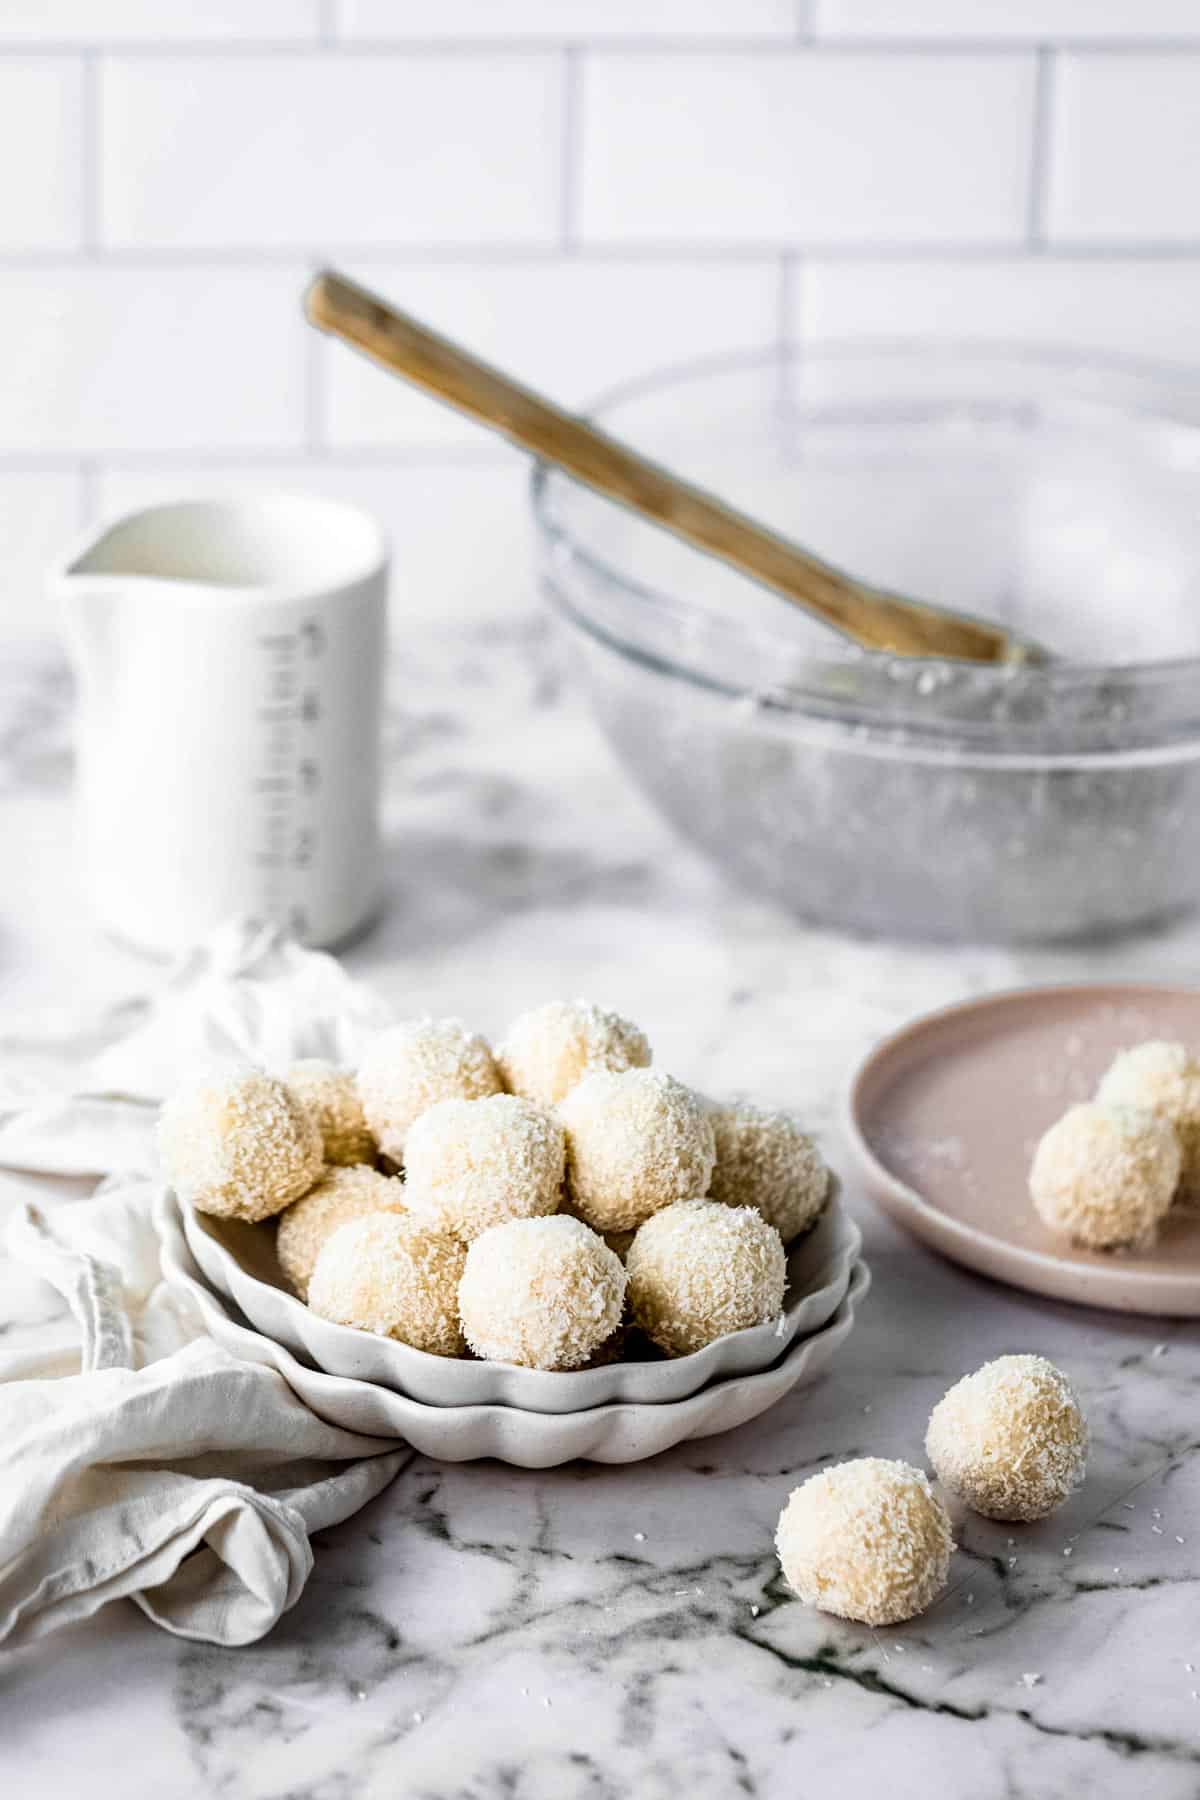 Kitchen counter with mixing bowl, measuring cup, and bowl of bite size dessert balls.